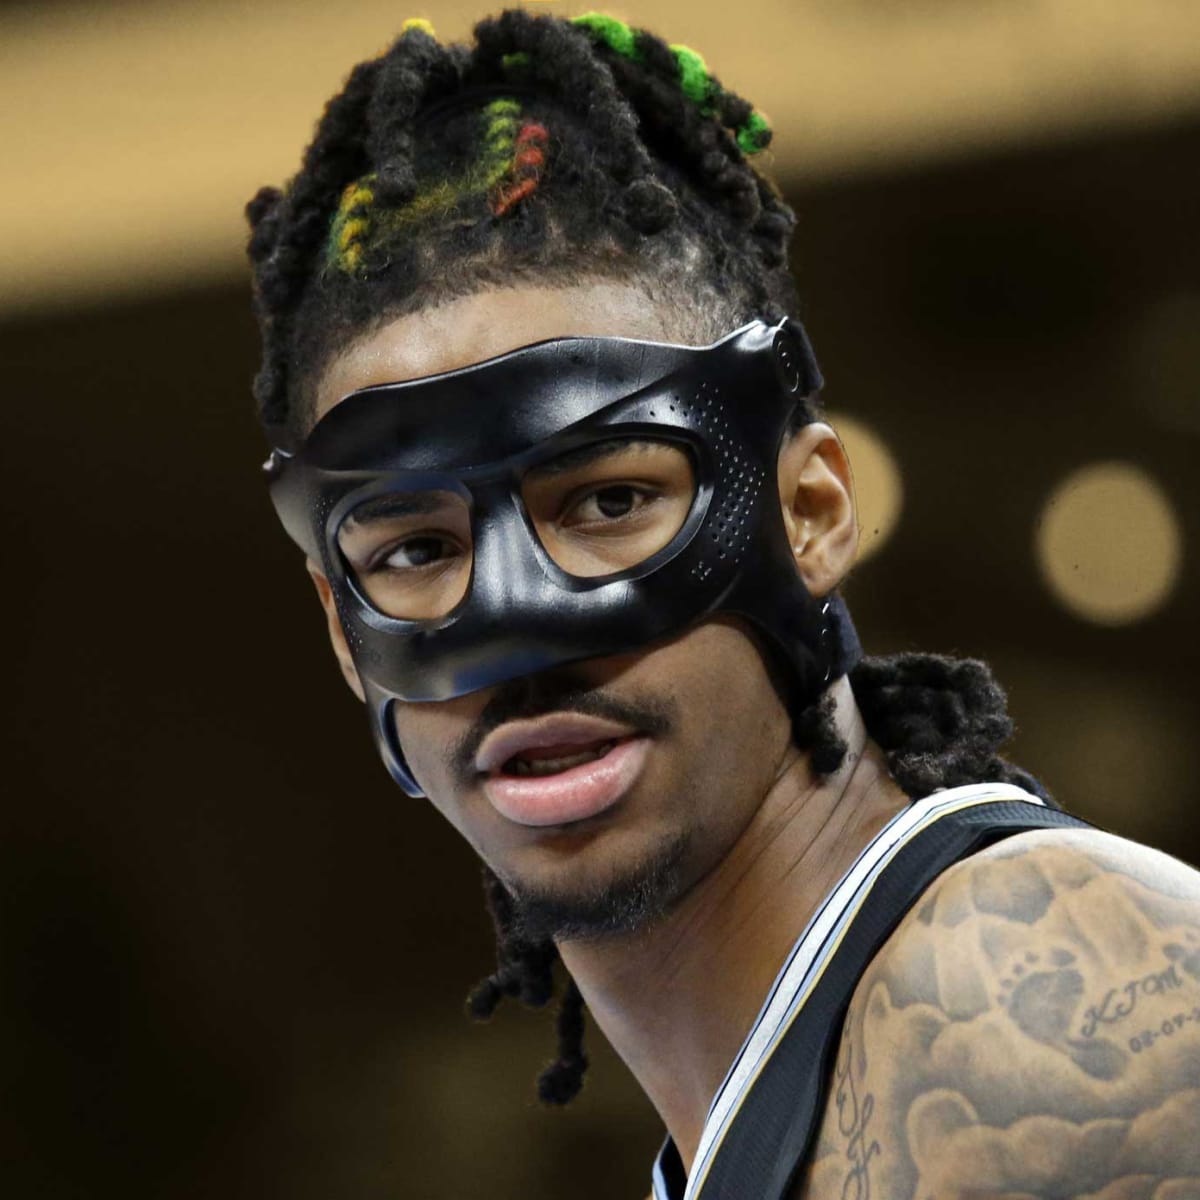 Why does Ja Morant wear a mask?